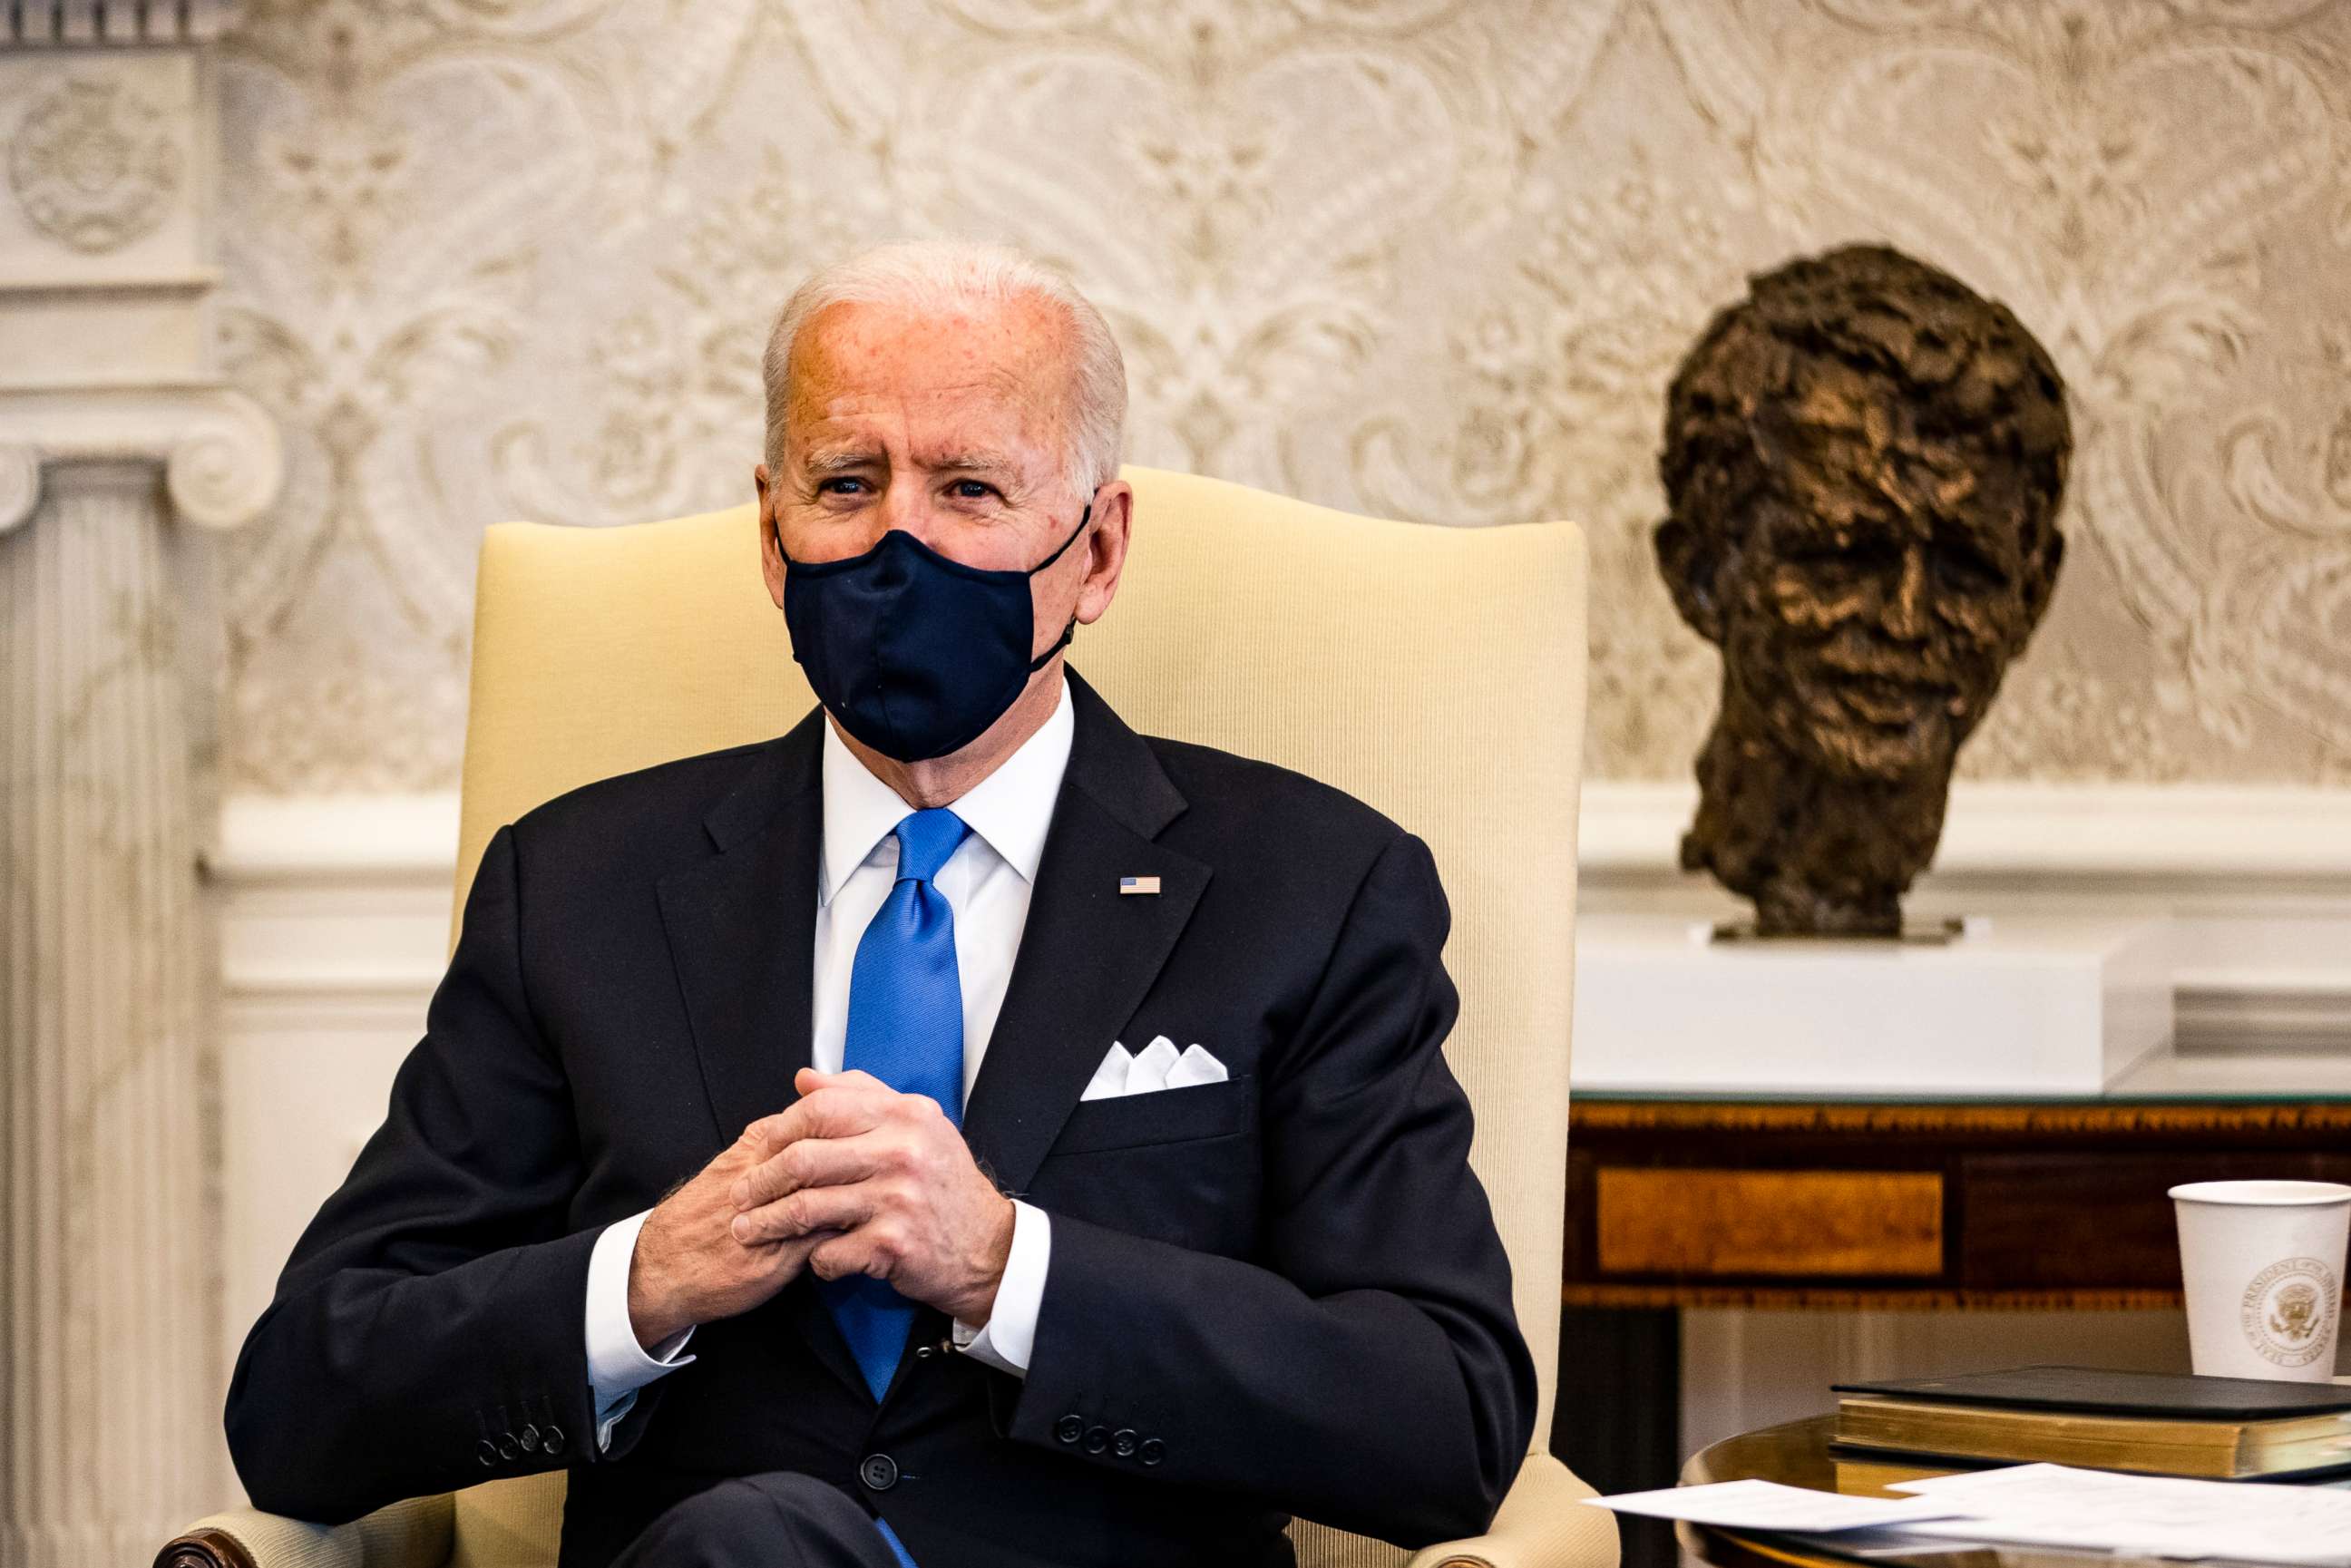 PHOTO: President Joe Biden holds a meeting on cancer with Vice President Kamala Harris and other lawmakers in the Oval Office at the White House on March 3, 2021.